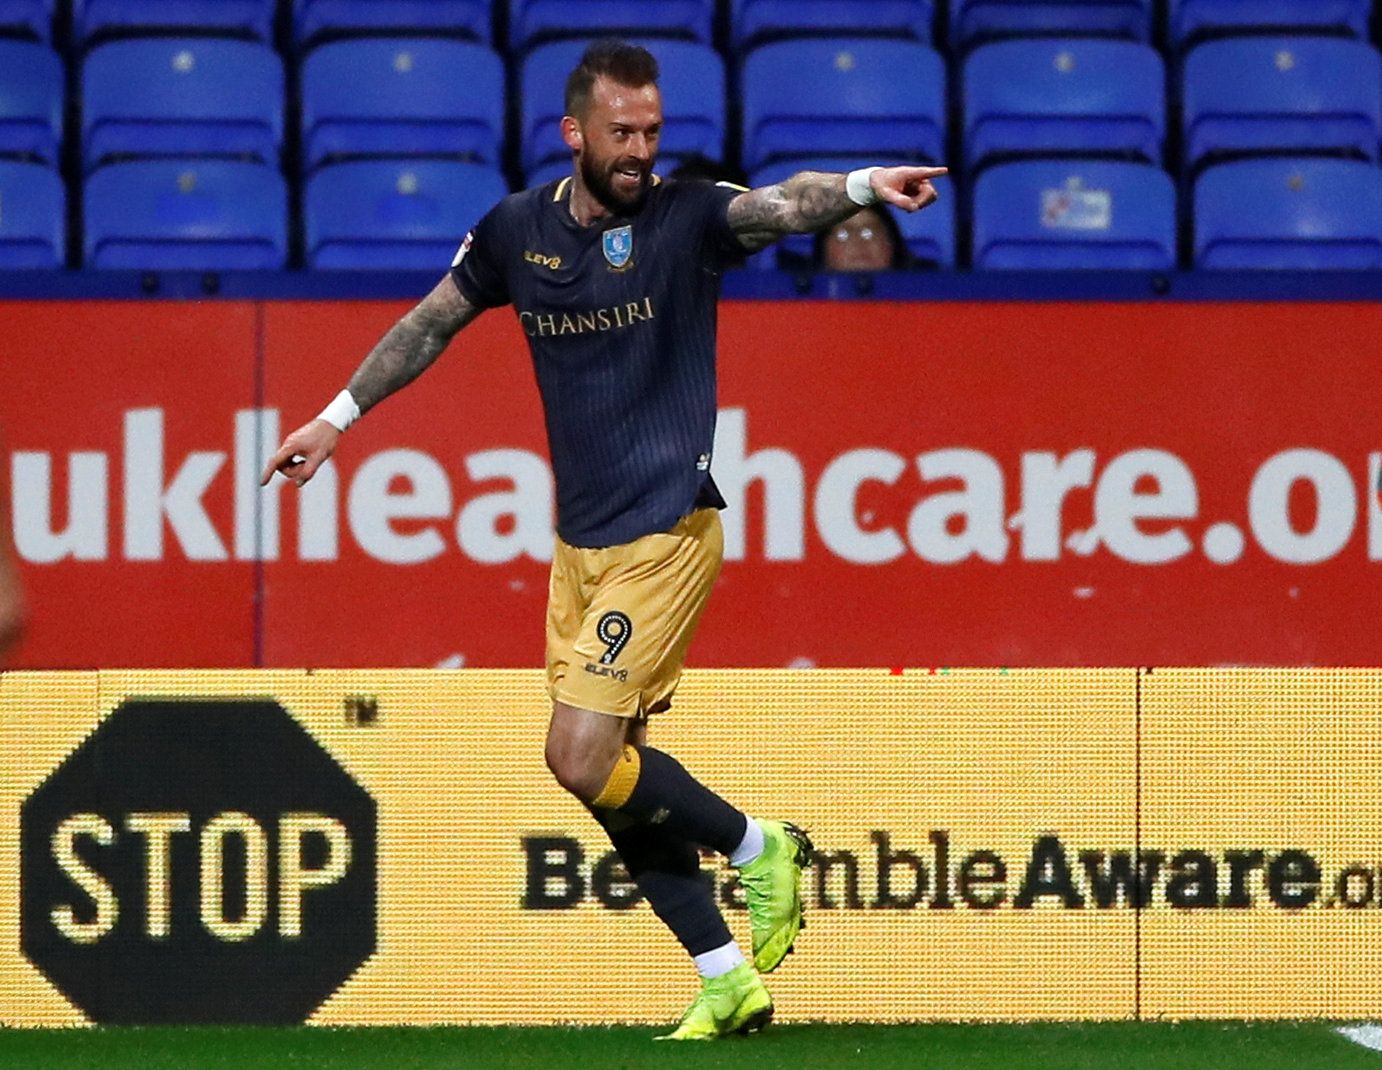 Soccer Football - Championship - Bolton Wanderers v Sheffield Wednesday - University of Bolton Stadium, Bolton, Britain - March 12, 2019   Sheffield Wednesday's Steven Fletcher celebrates scoring their first goal   Action Images/Jason Cairnduff    EDITORIAL USE ONLY. No use with unauthorized audio, video, data, fixture lists, club/league logos or 